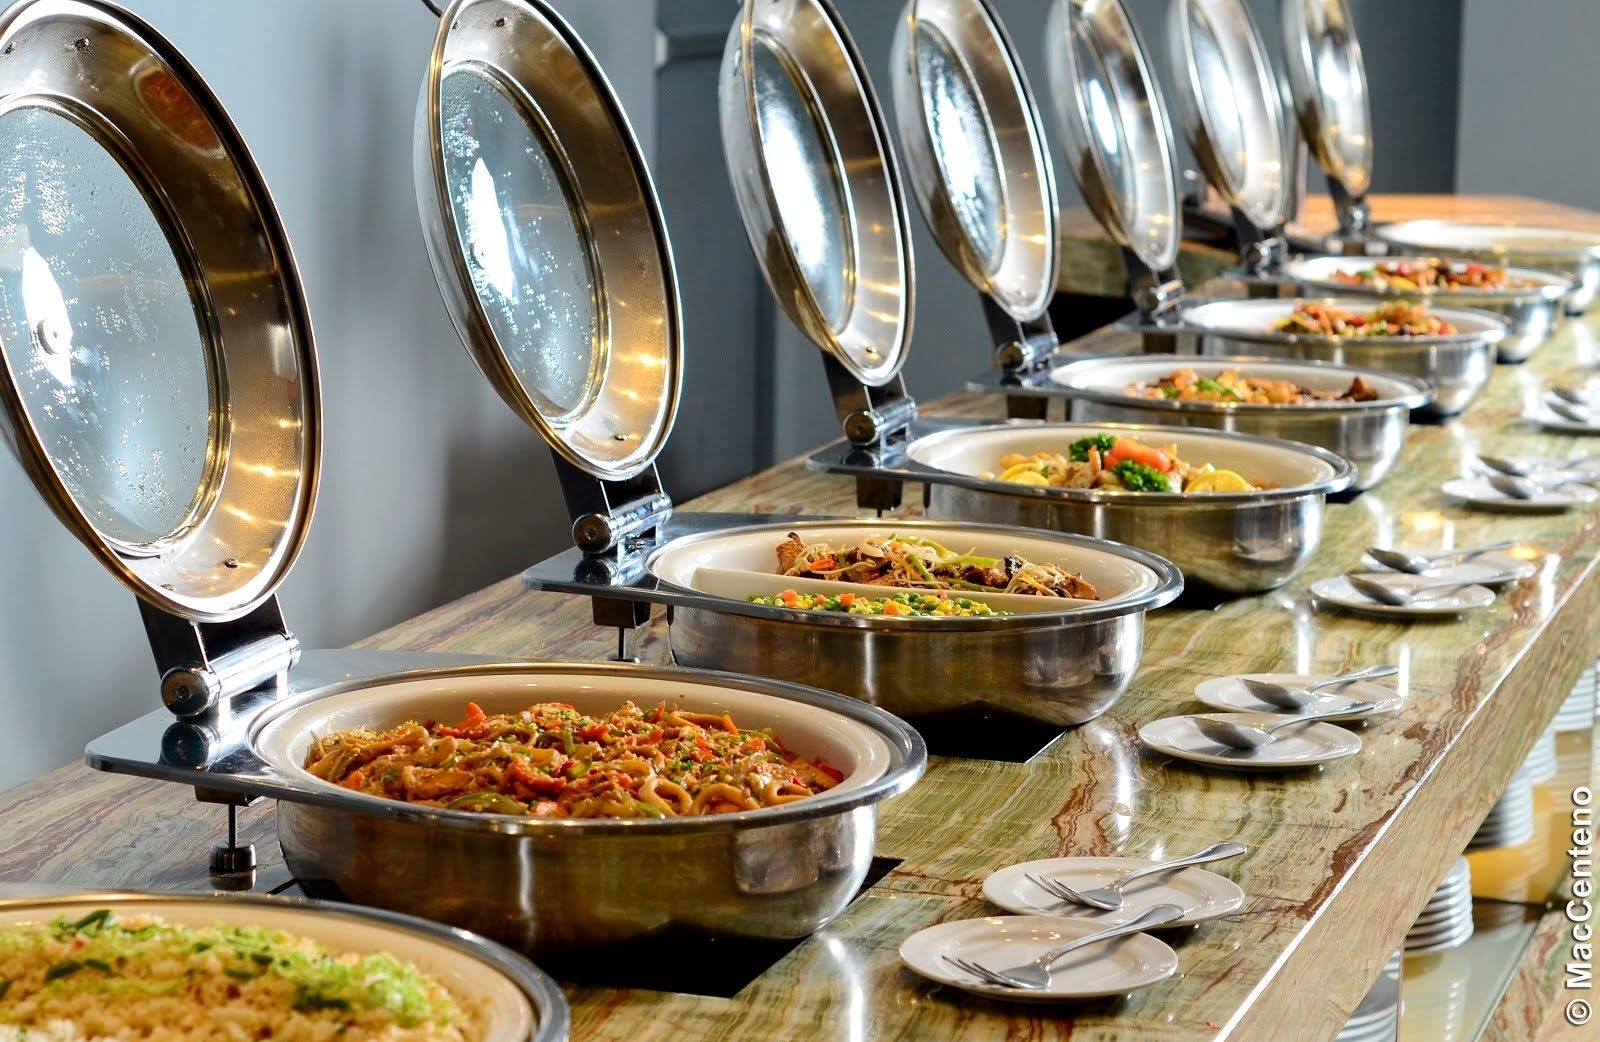 Food caterers can make your event more memorable